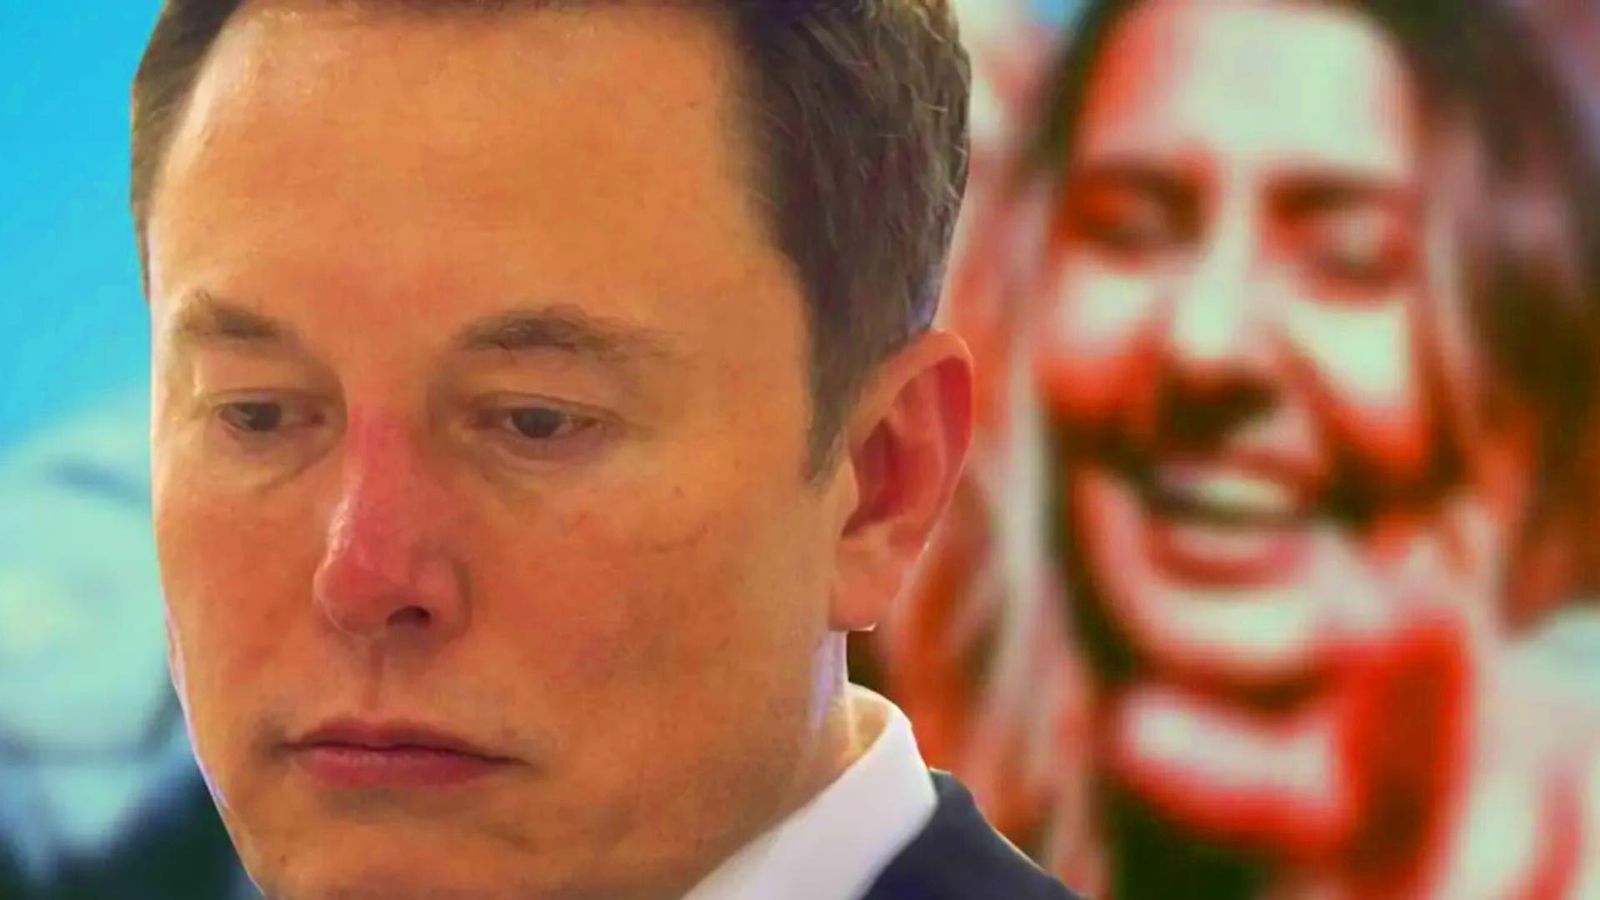 Girls pointing and laughing at Tesla CEO Elon Musk after earning a Guinness world record for most money lost by a single person 